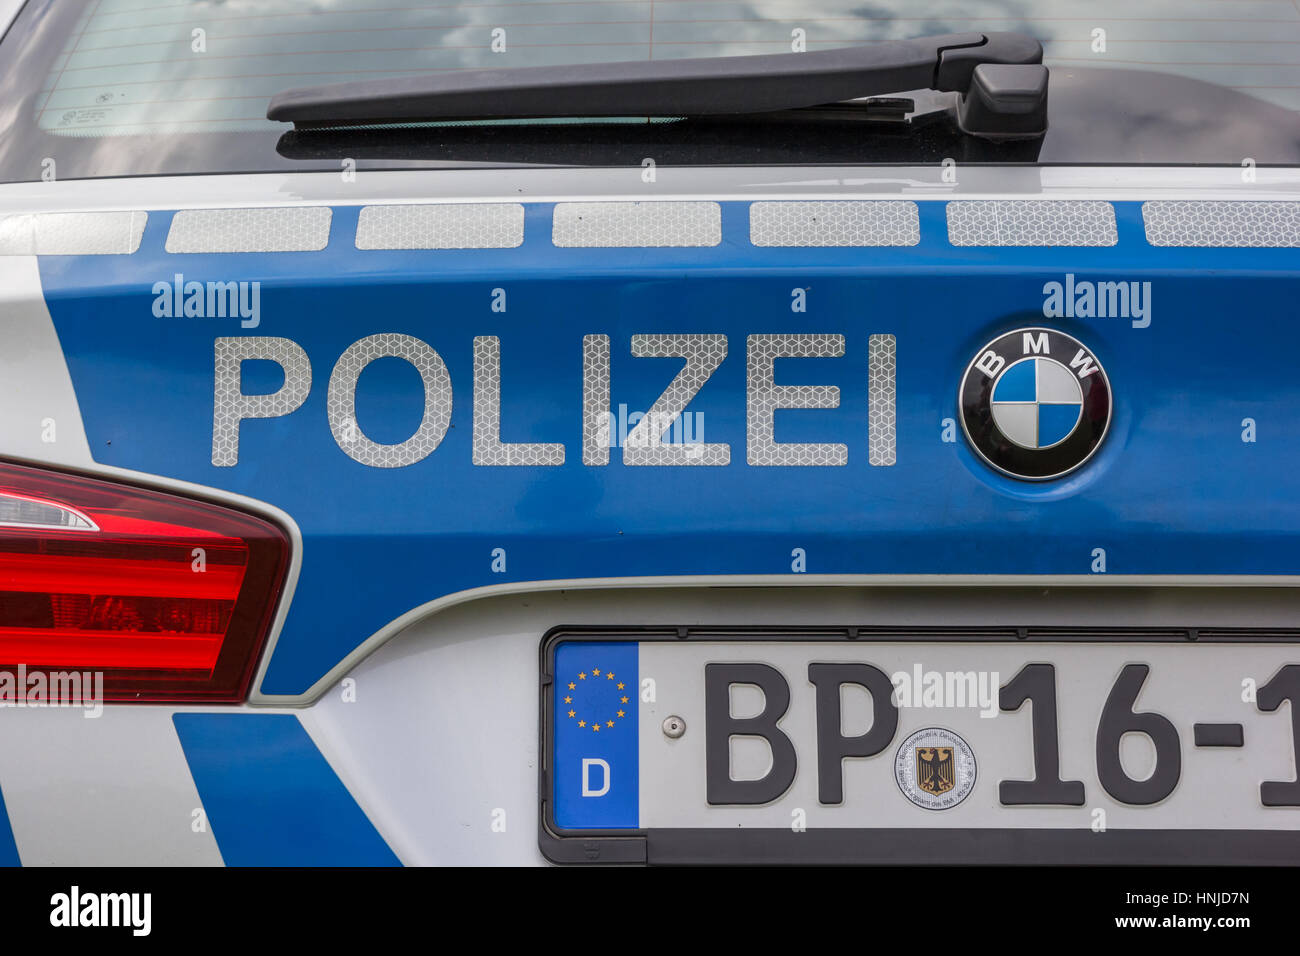 Polizei Is The German Word For Police Here Written On The Back Of